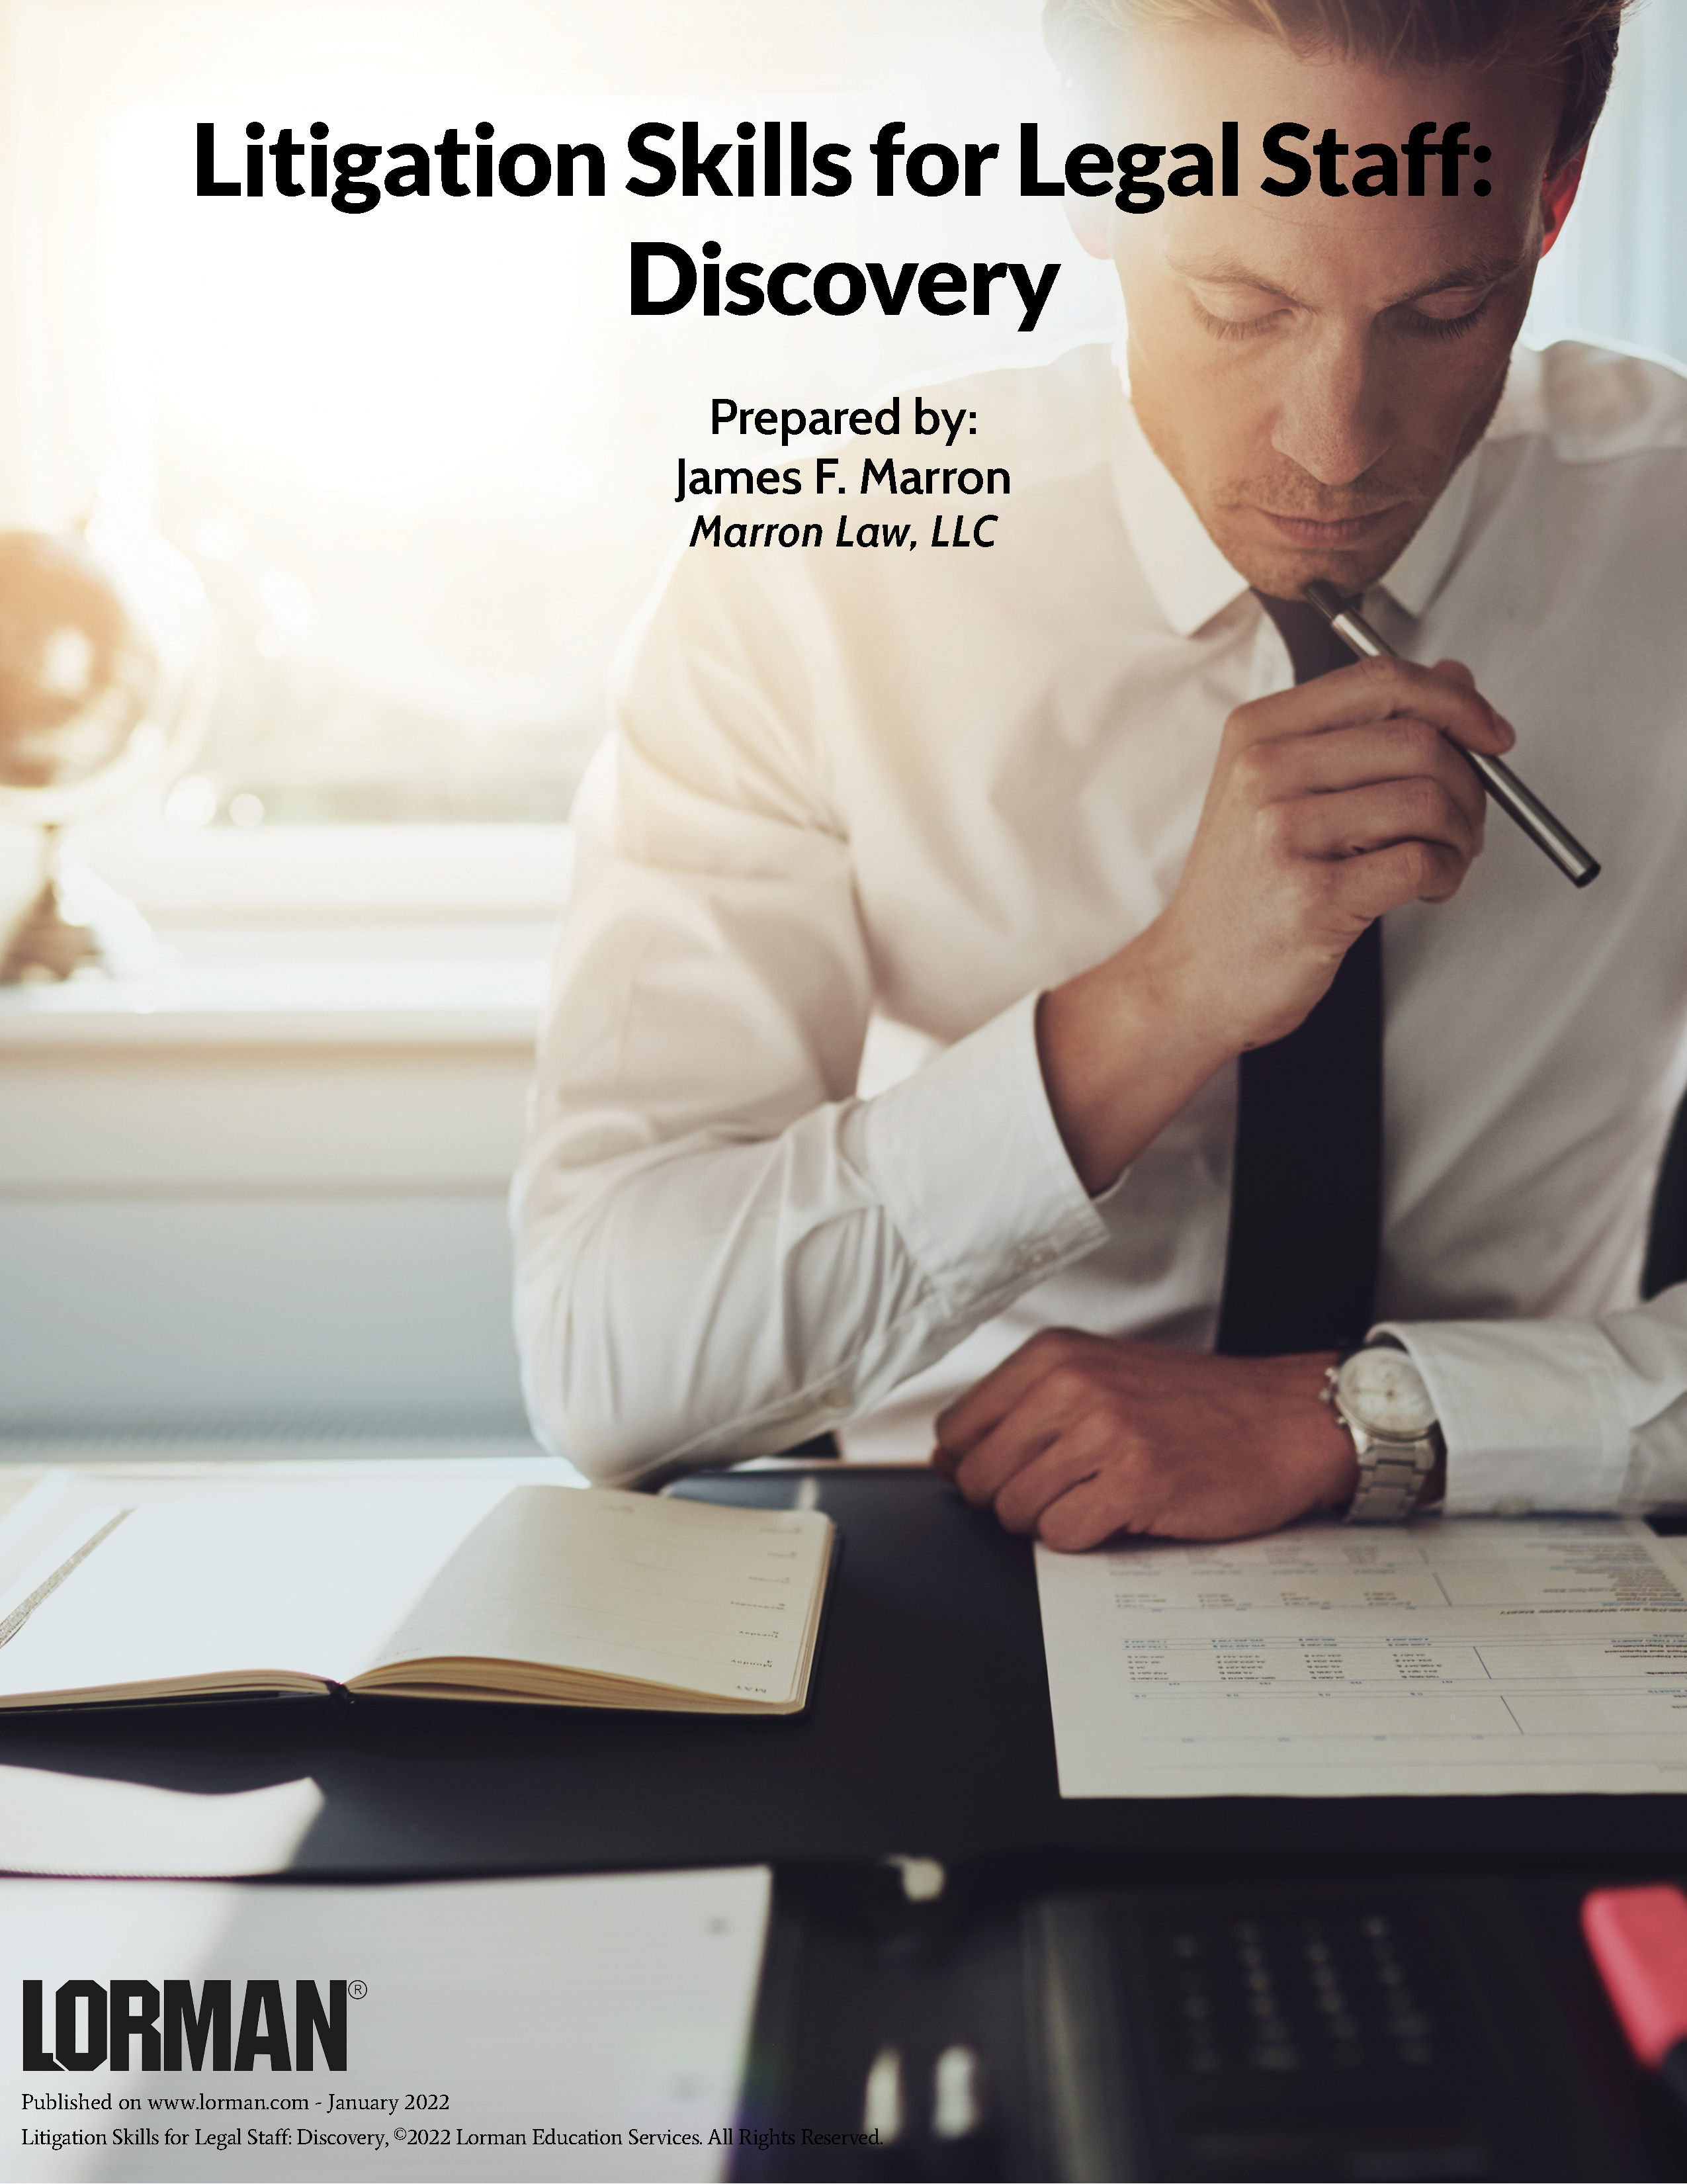 Litigation Skills for Legal Staff: Discovery